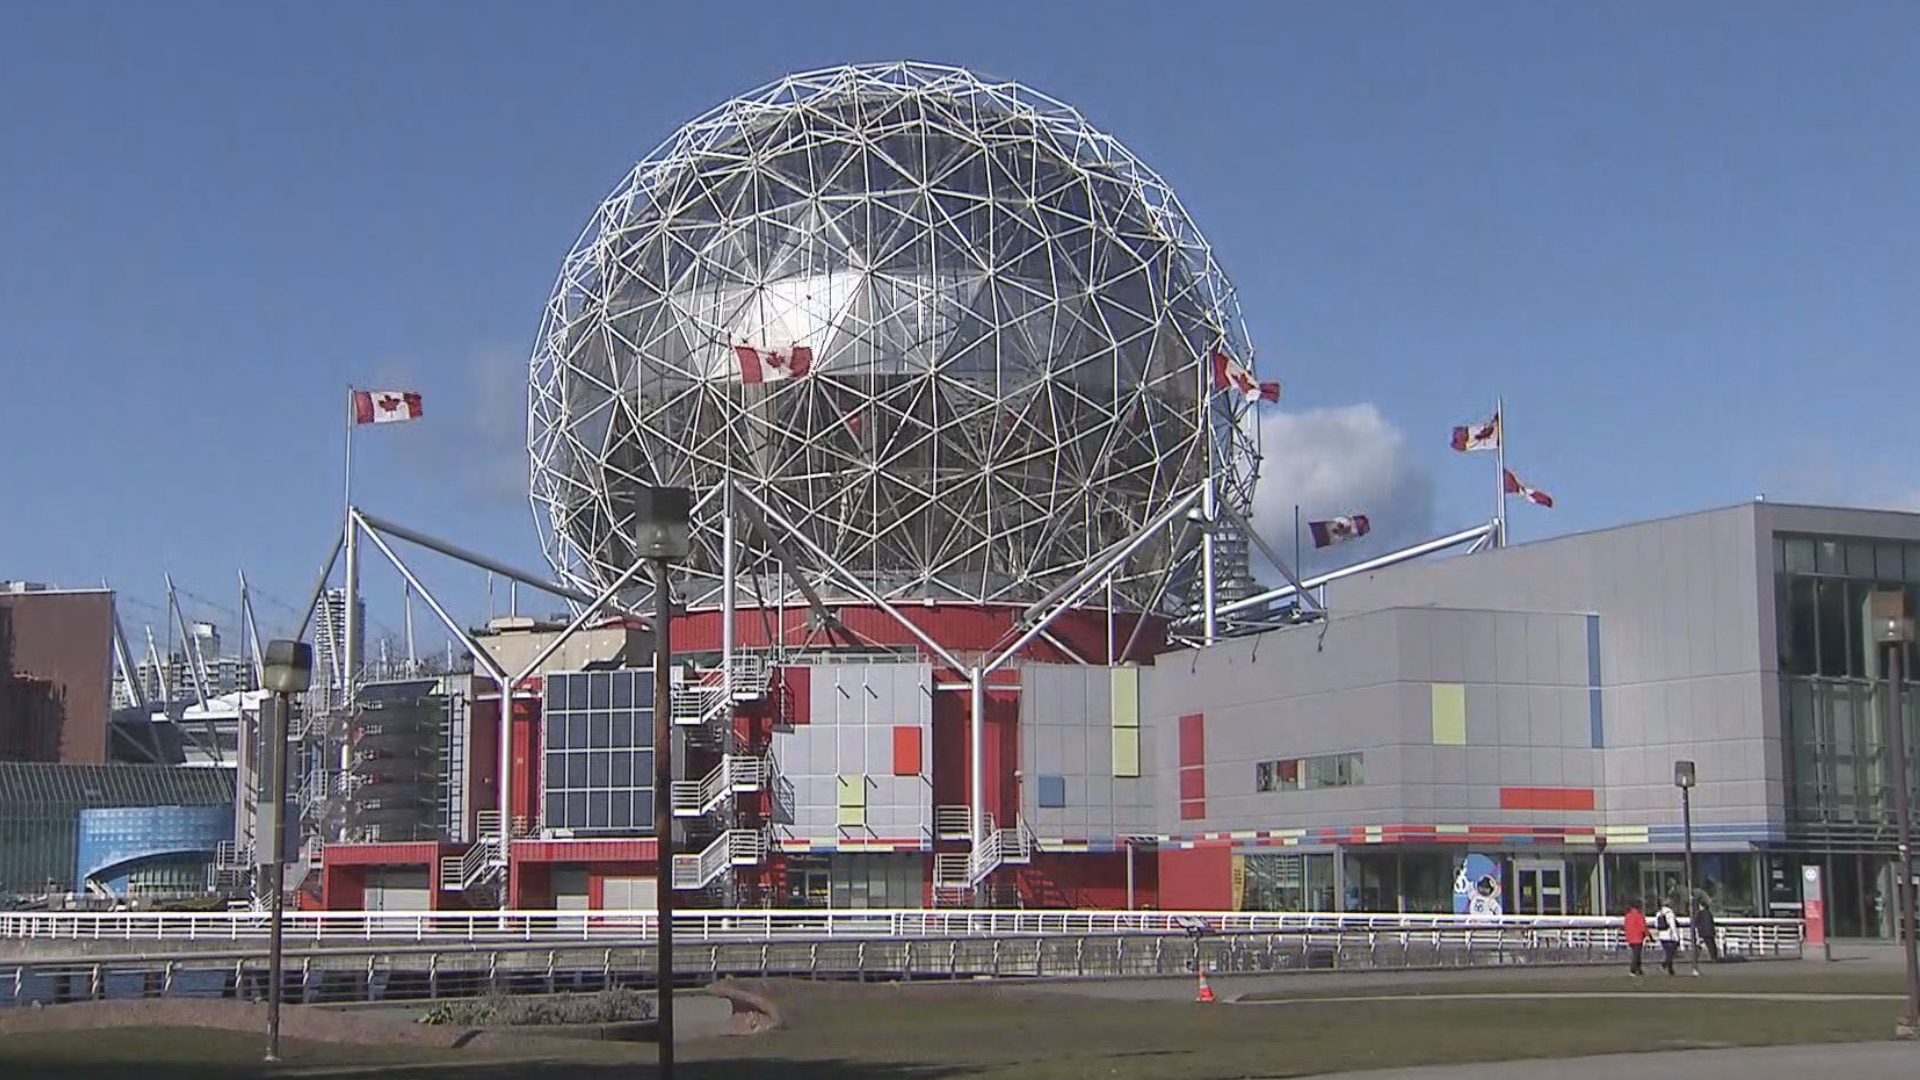 Vancouver's Science World done to receive $19 million in upgrades